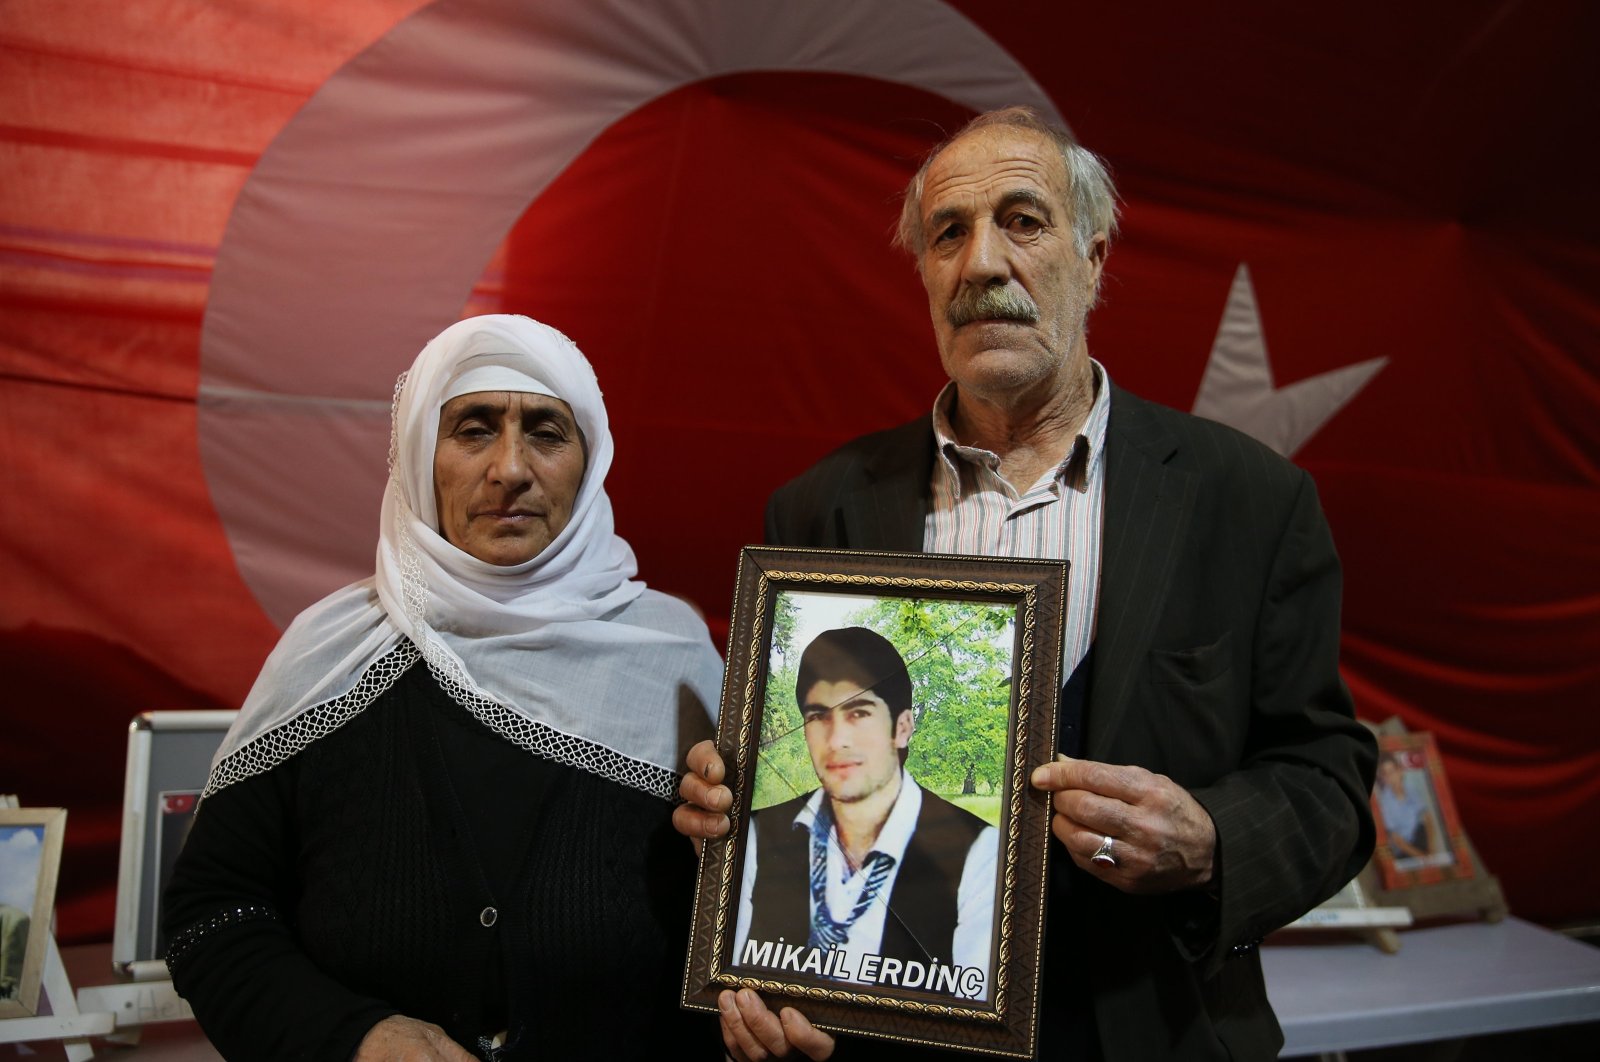 Yusuf Erdinç (R) and his wife pose with a picture of their son Mikail, who was abducted by PKK terrorists in 2015, during the sit-in protest in the Diyarbakır province, Türkiye, Jan. 13, 2024. (AA Photo)